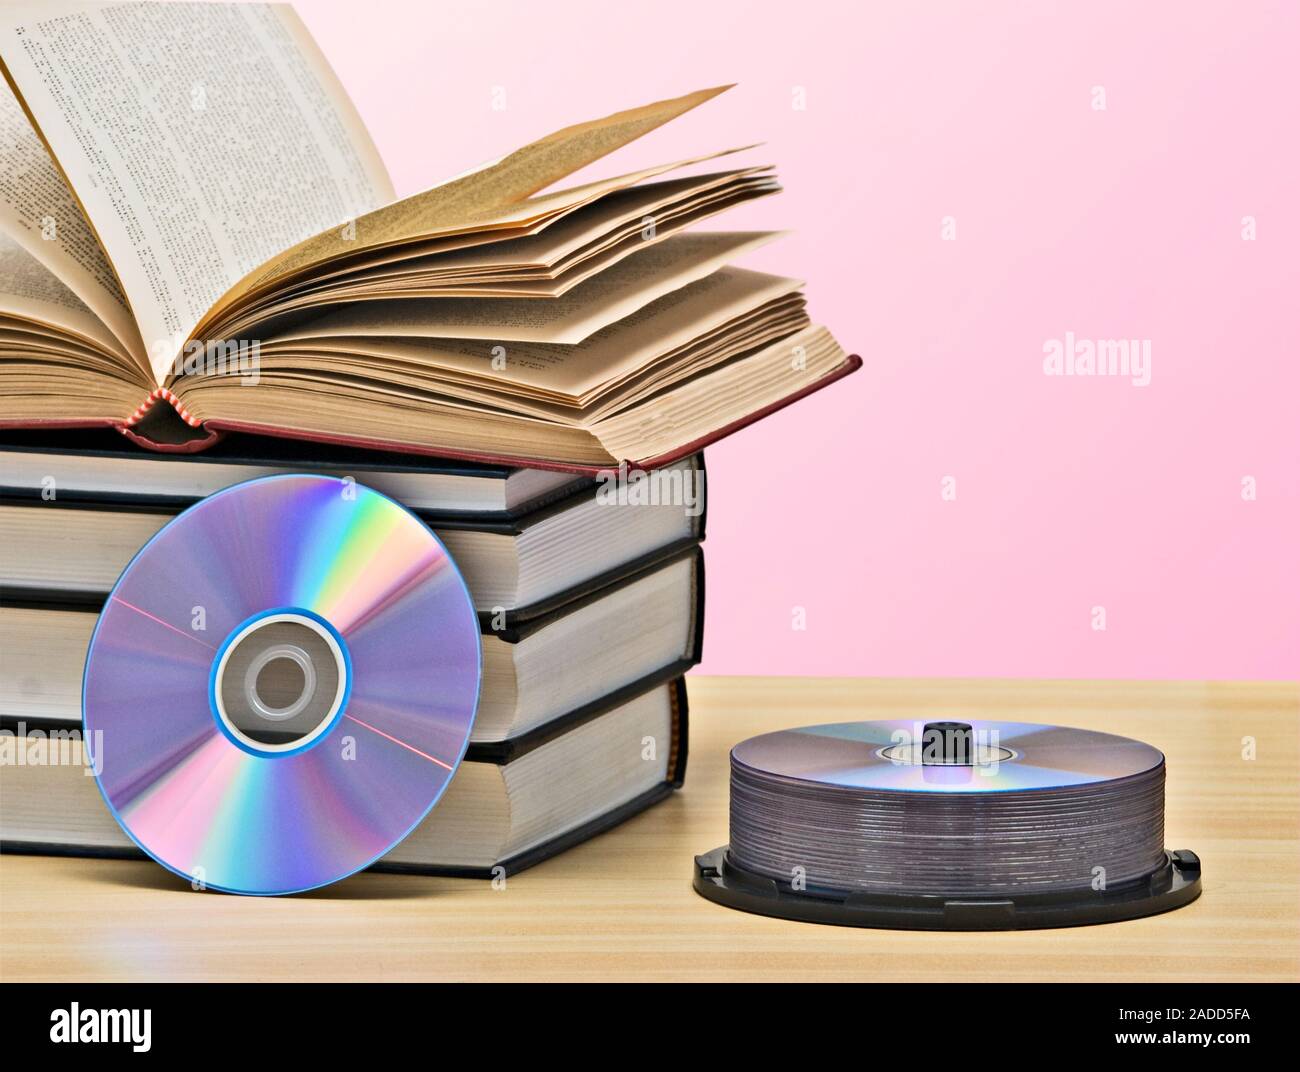 Pile of books  and DVD disk as symbols of old and new methods of information storage Stock Photo